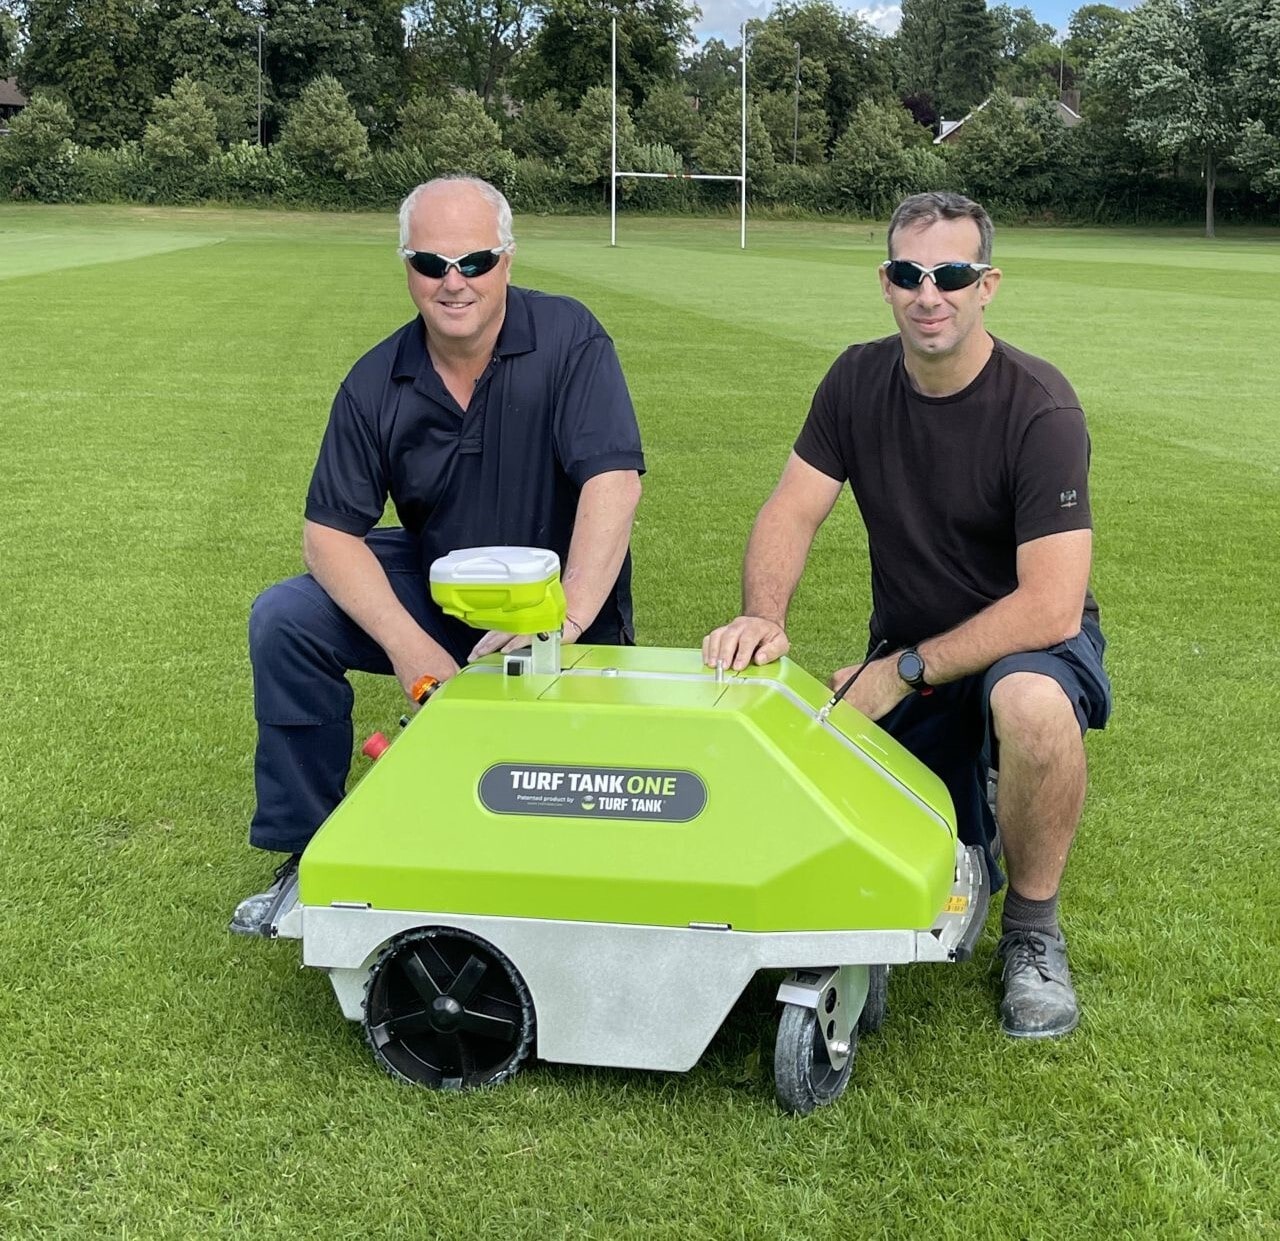 Aston university customers getting a picture with their Turf tank robot